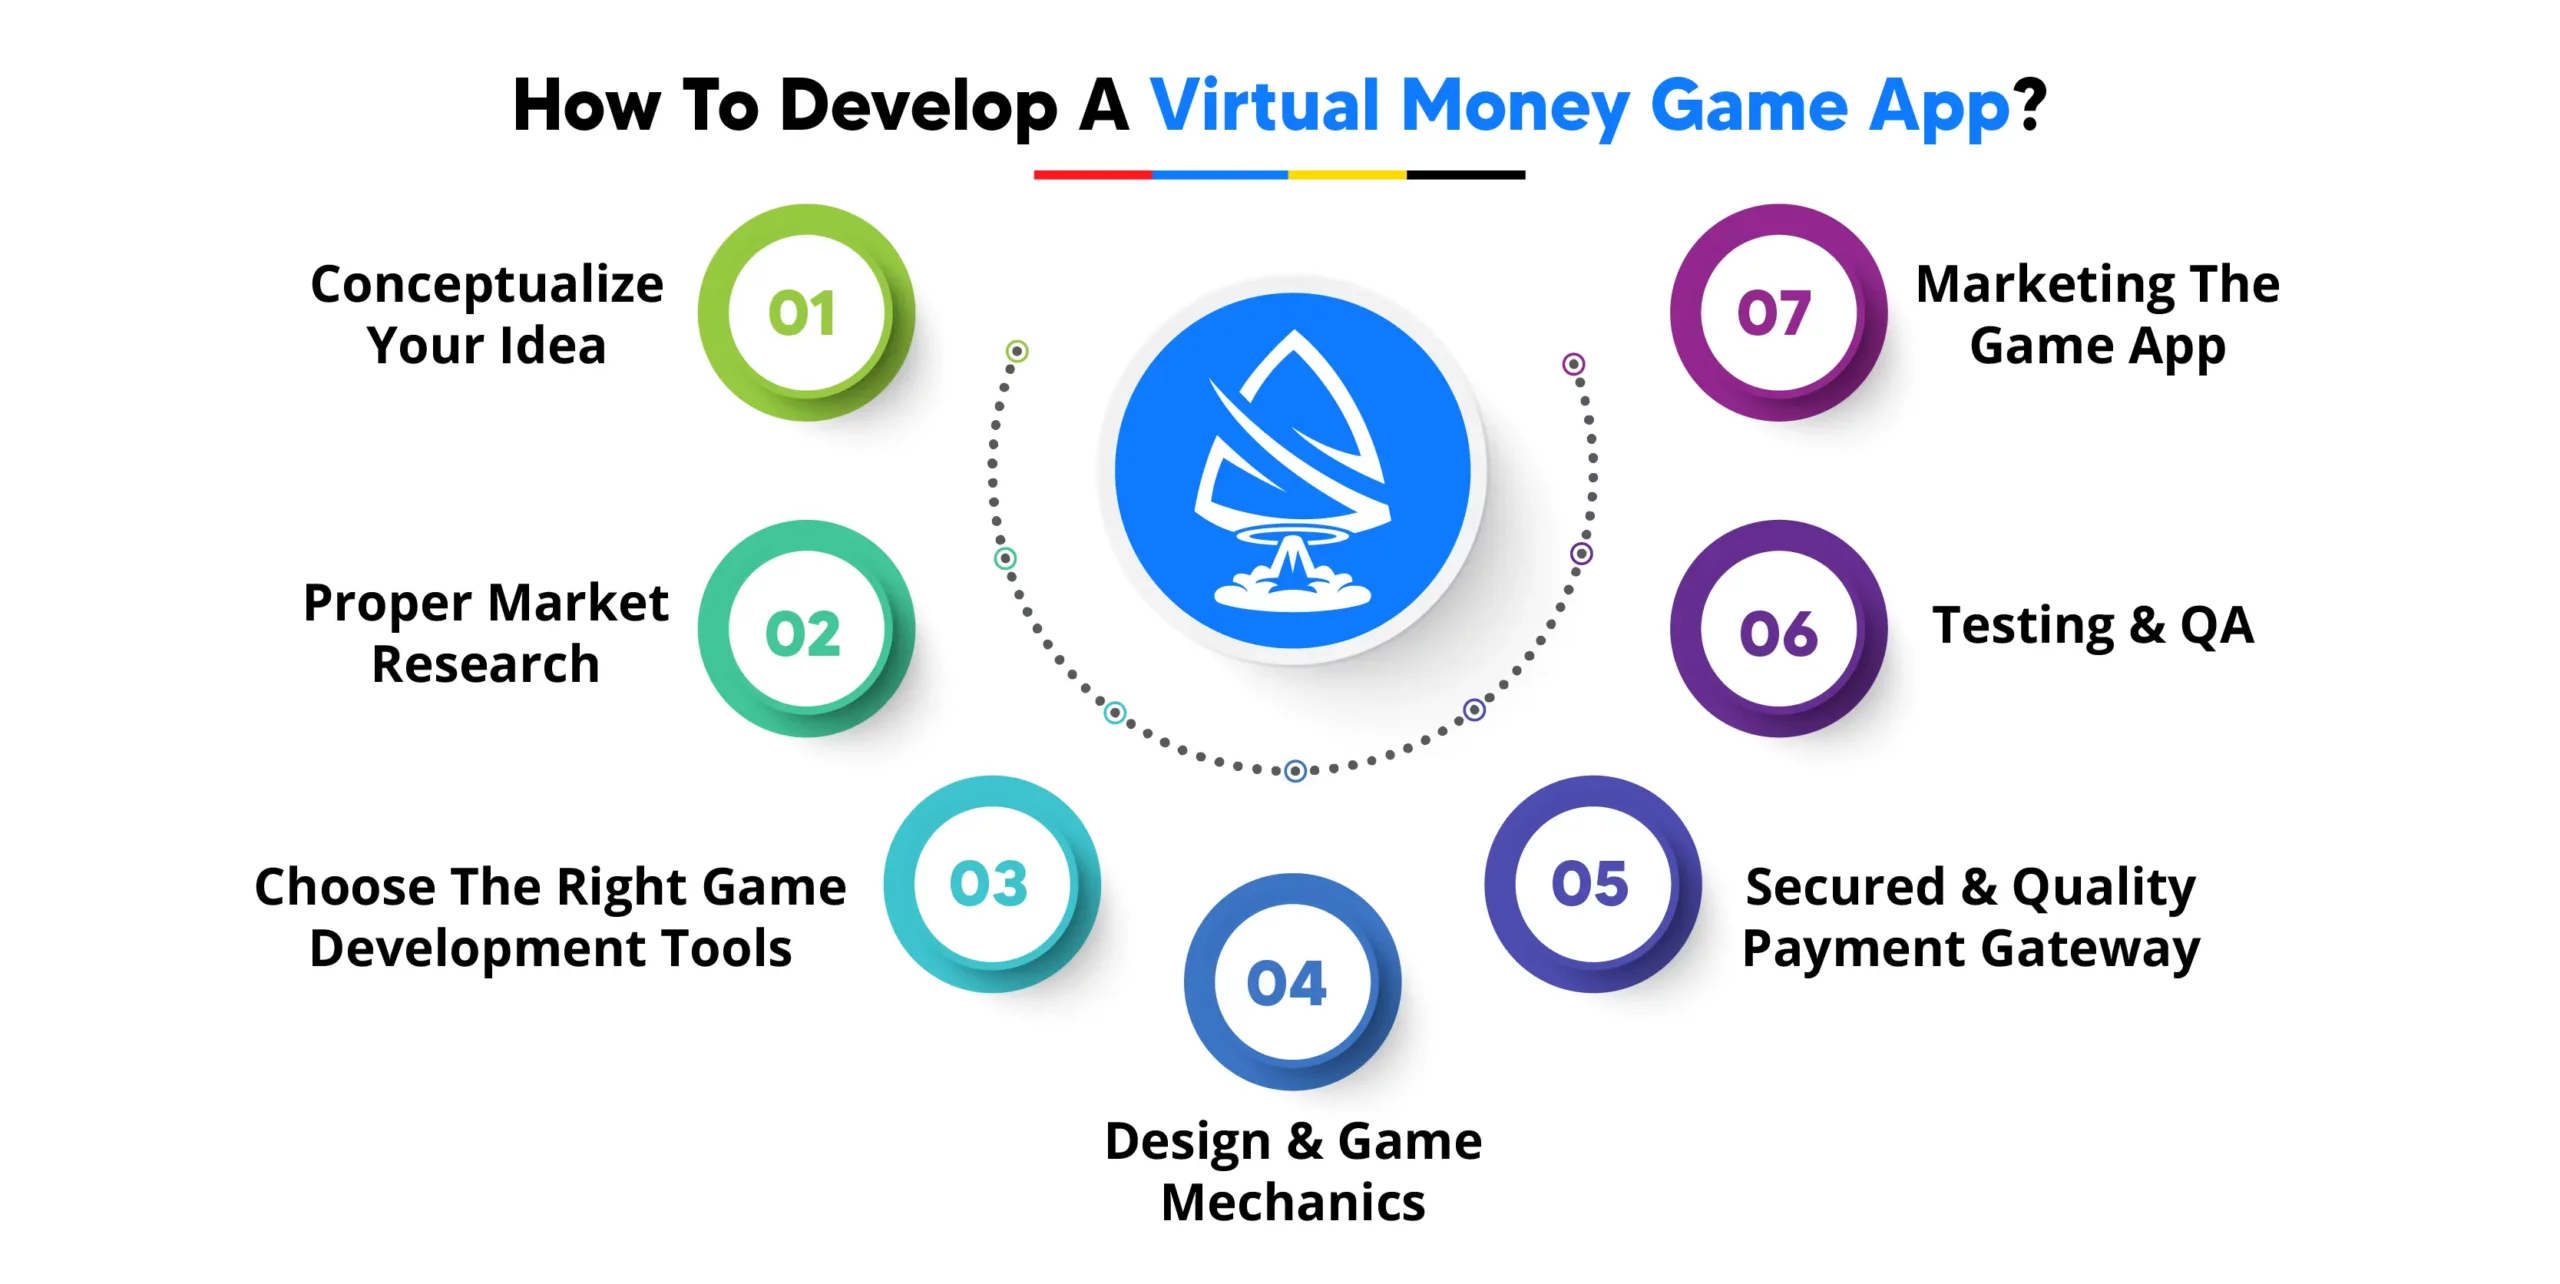 How To Develop A Virtual Money Game App?